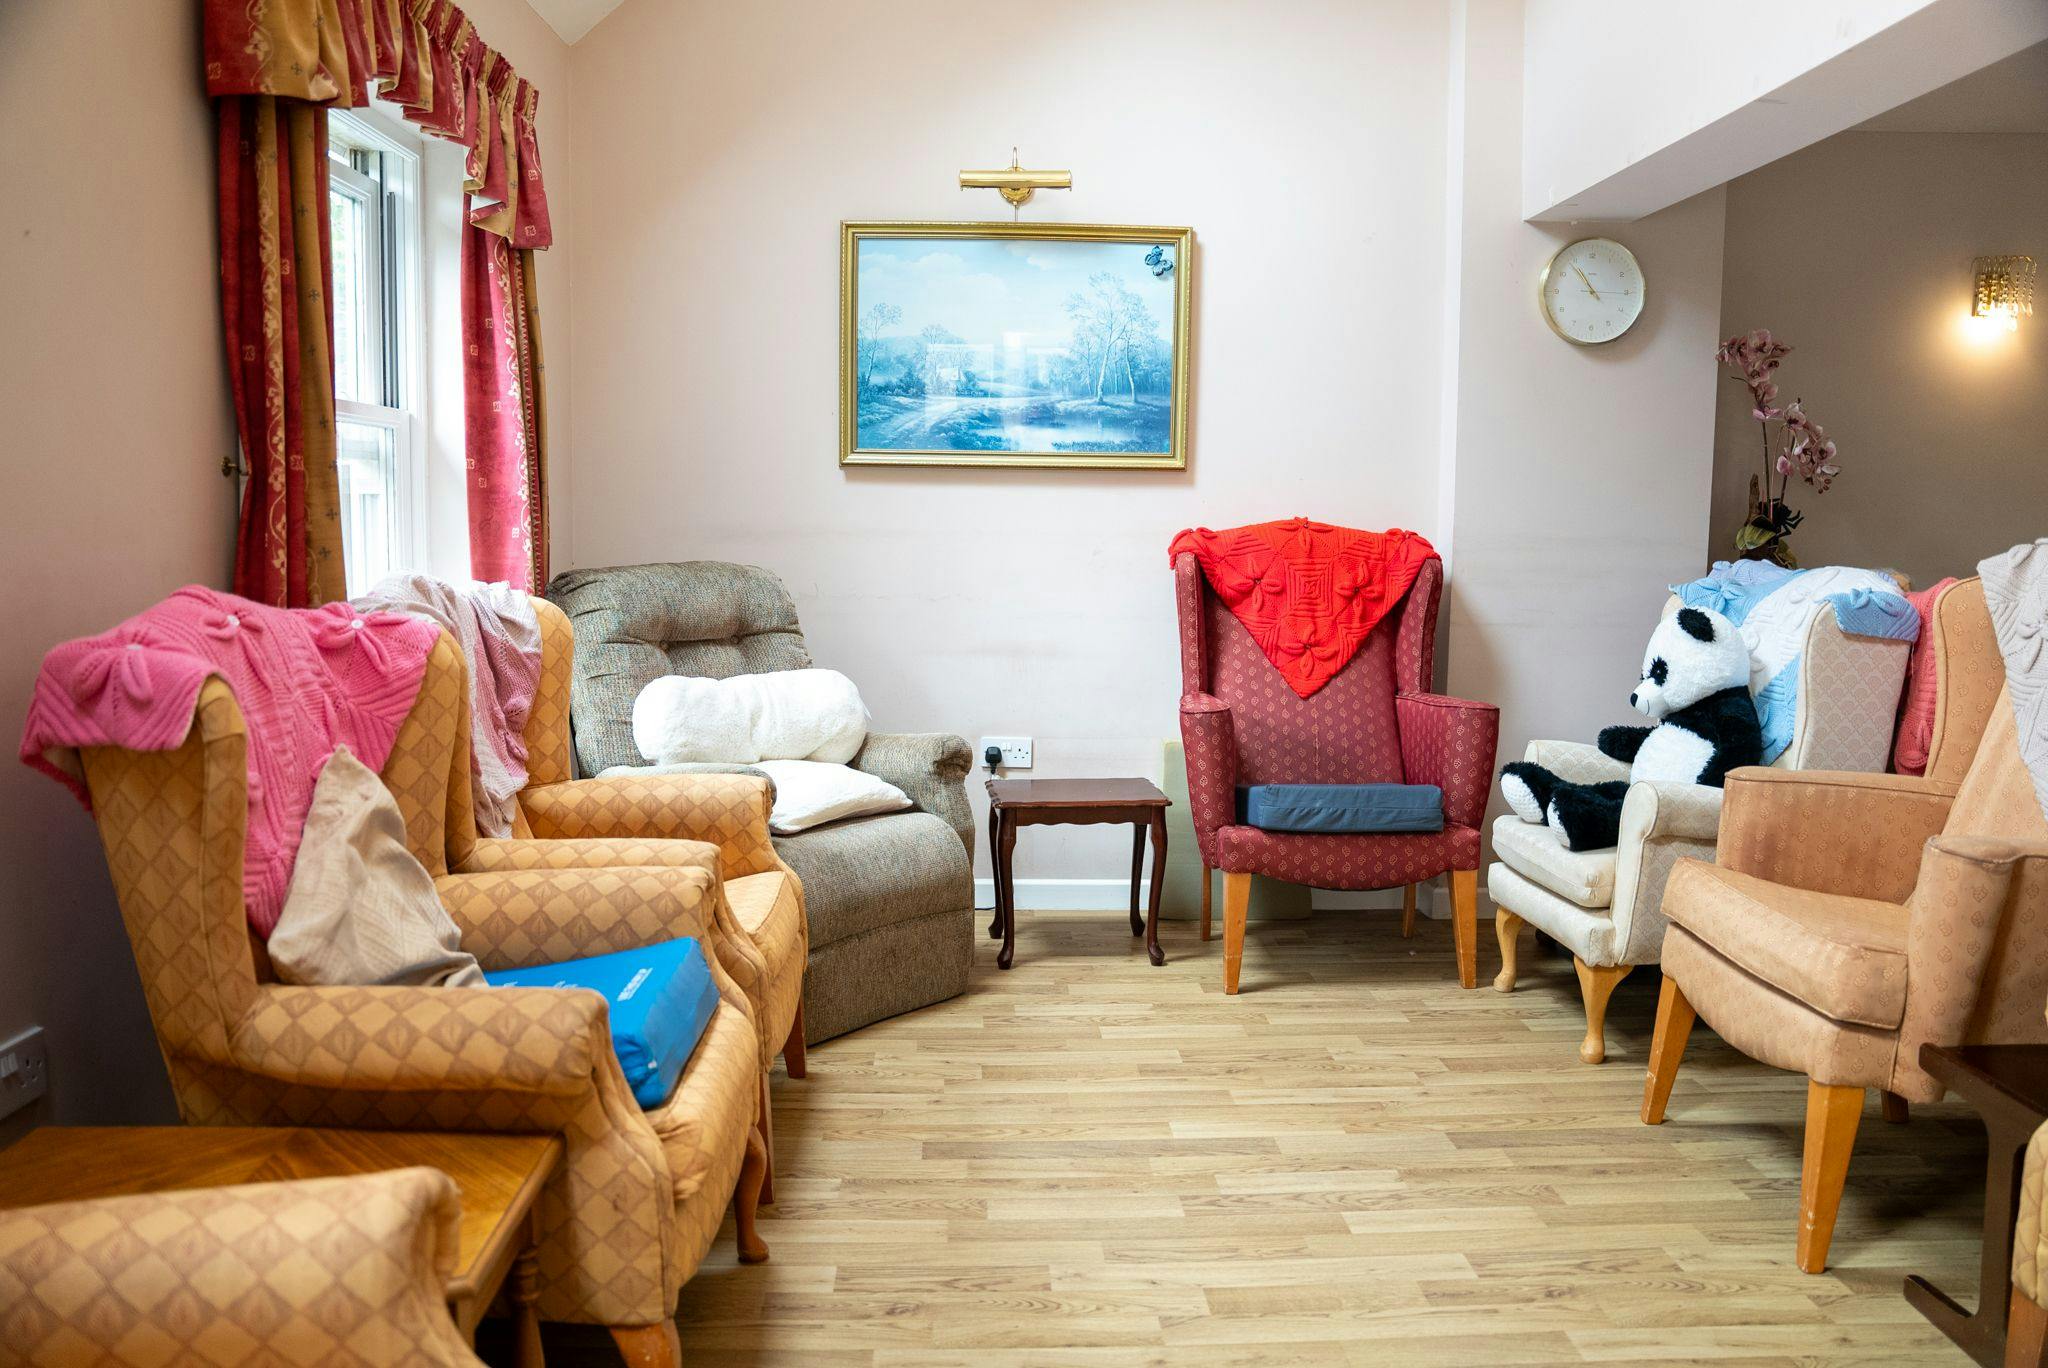 ACI Care Group - The Old Rectory care home 003